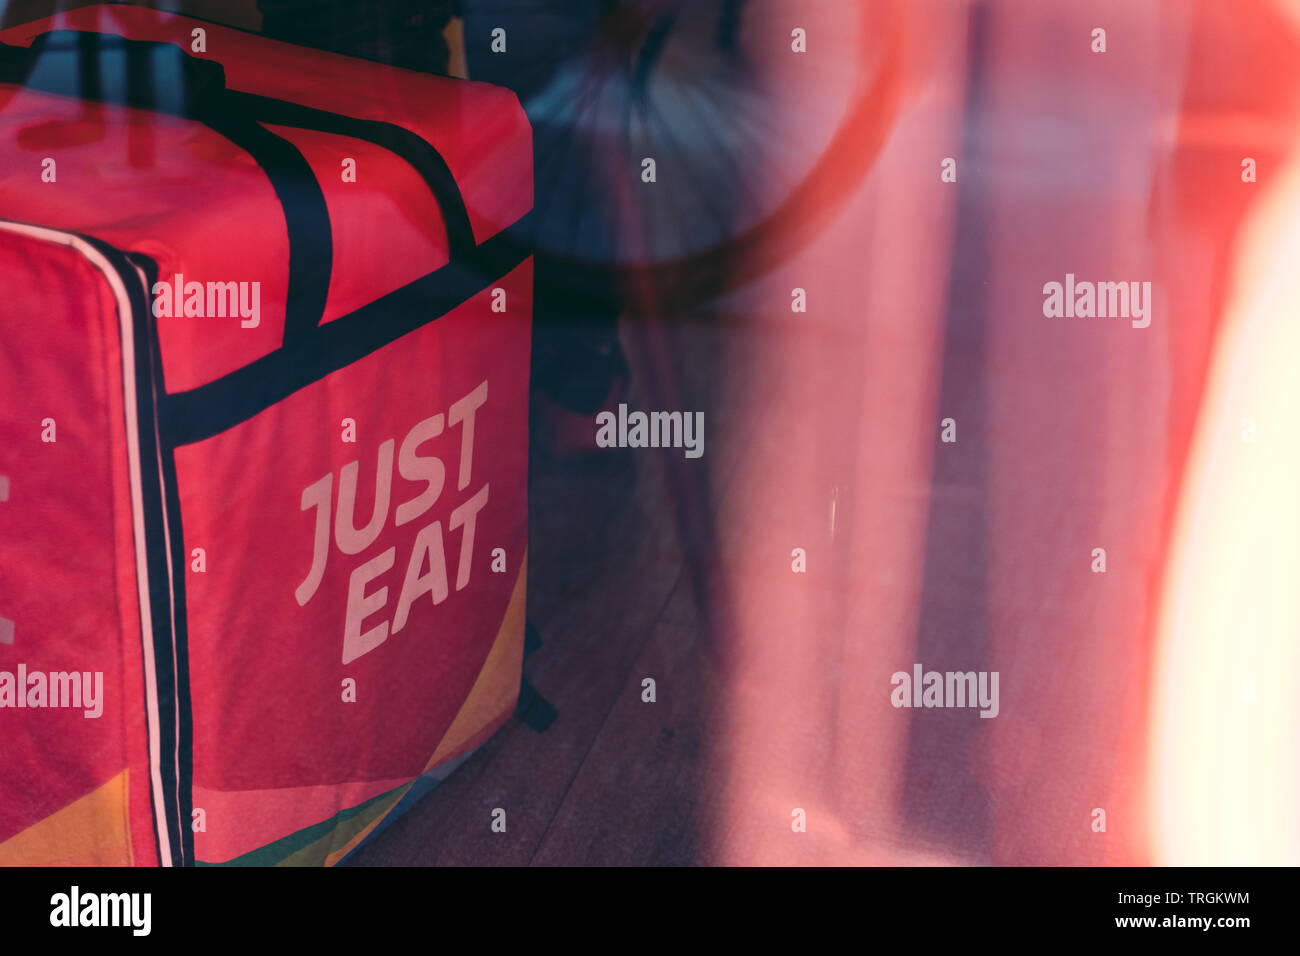 Valencia, Spain - June 1, 2019:: Just Eat  logo Colored logo on the backpack. Online food ordering, home delivery service. Food take away. Stock Photo